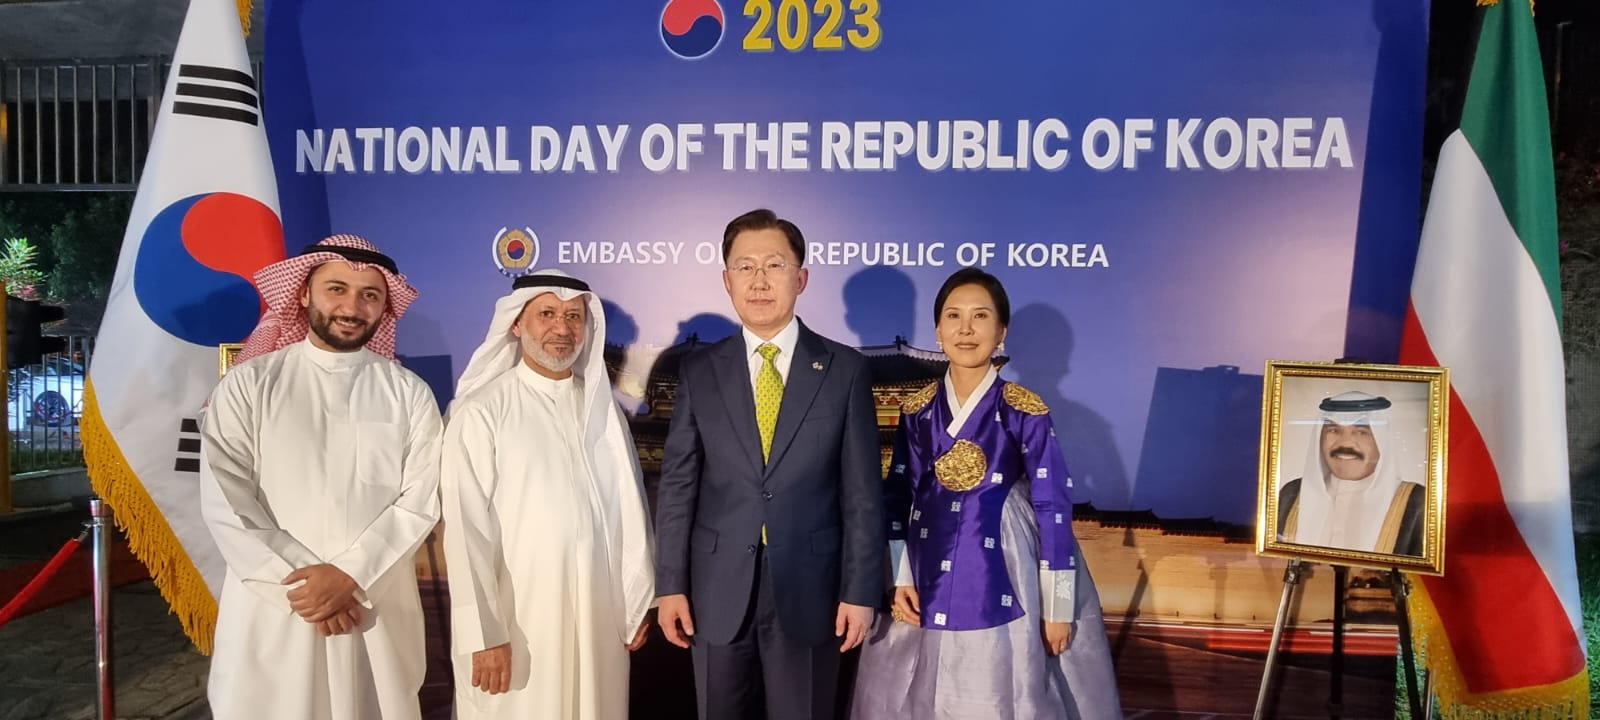 RANK Joins in the Festivities: Celebrating Korean National Day in Kuwait